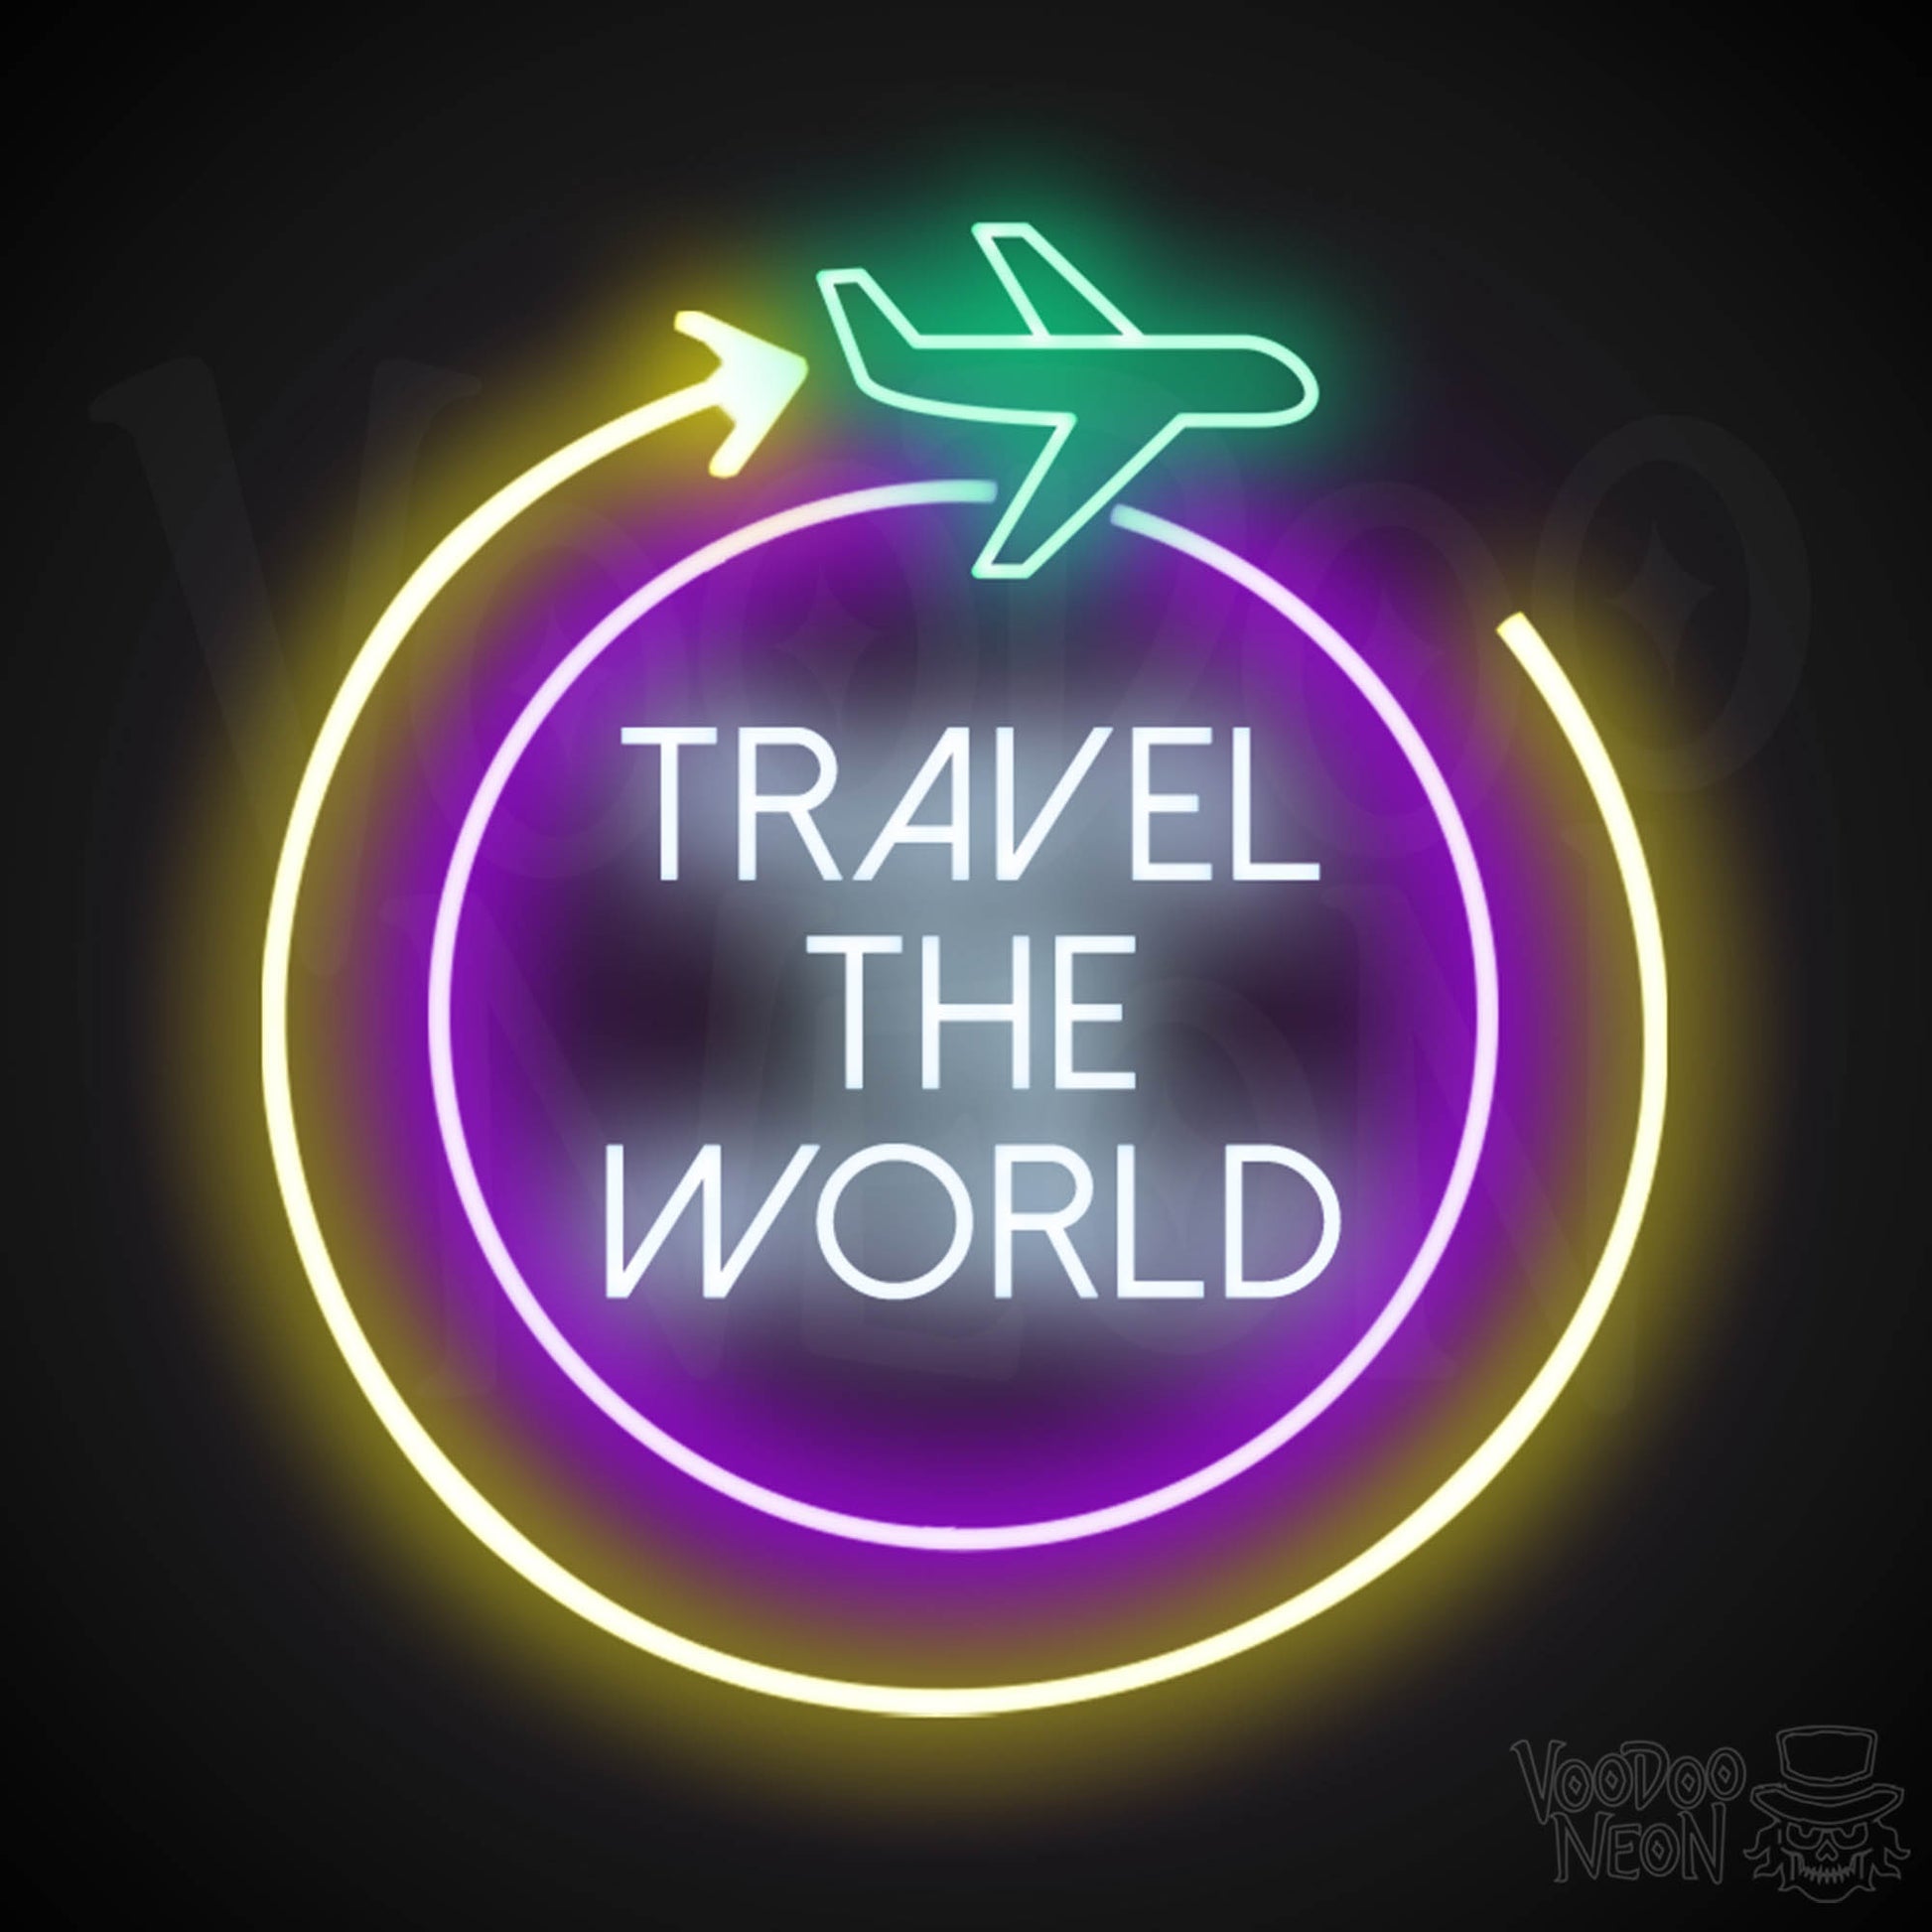 Let's Travel The World Neon Sign - LED Neon Wall Art - Color Multi-Color